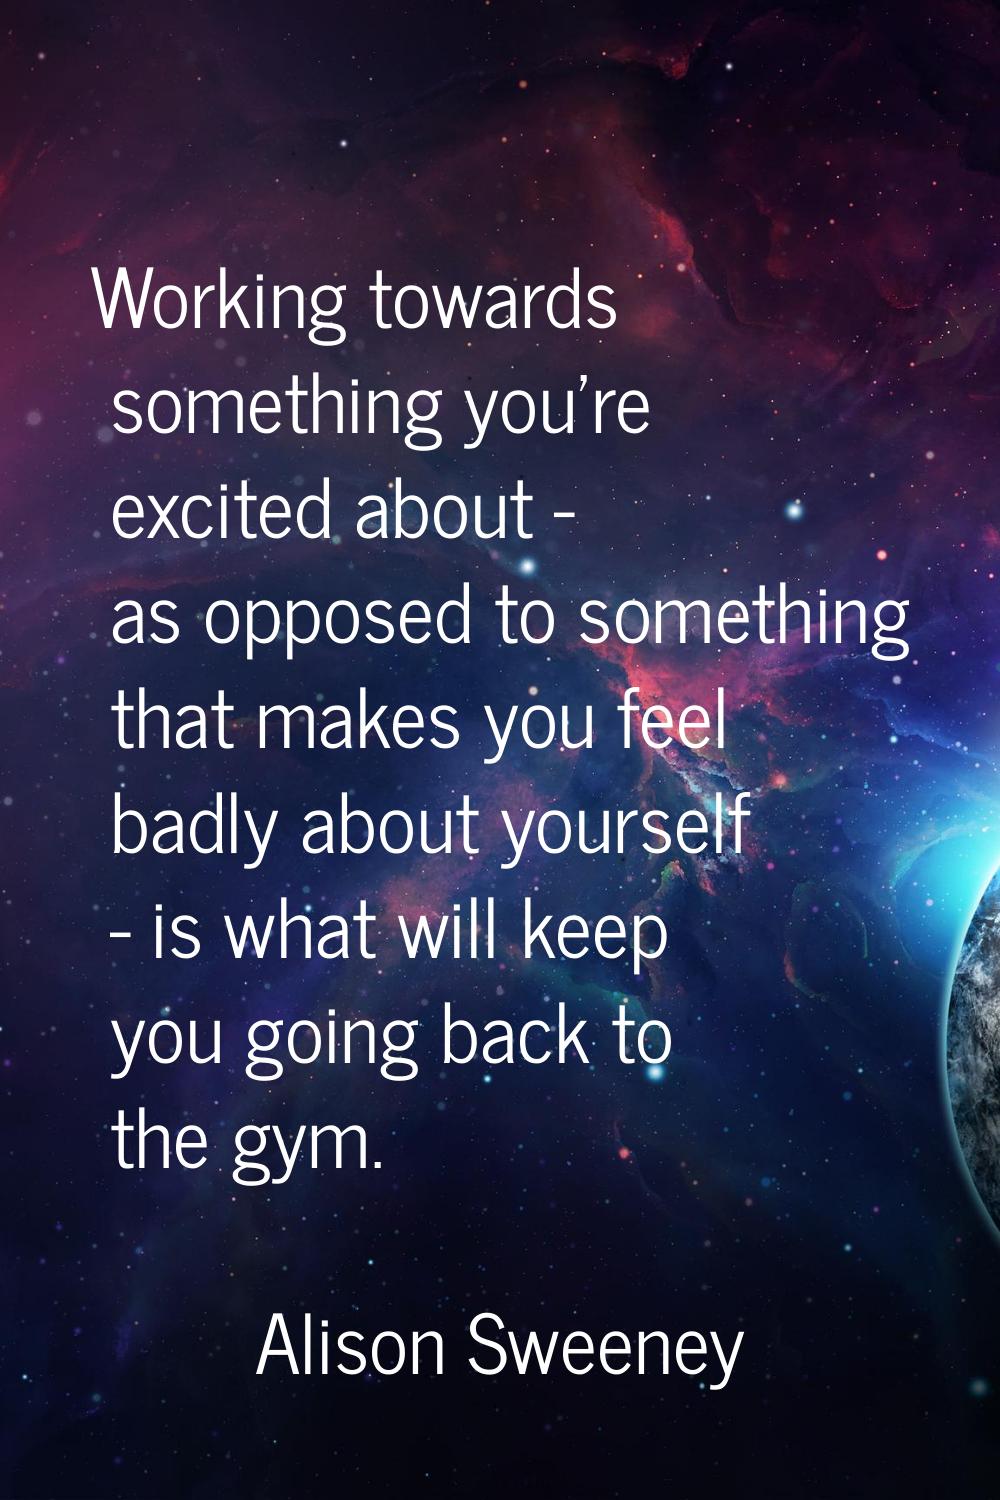 Working towards something you're excited about - as opposed to something that makes you feel badly 